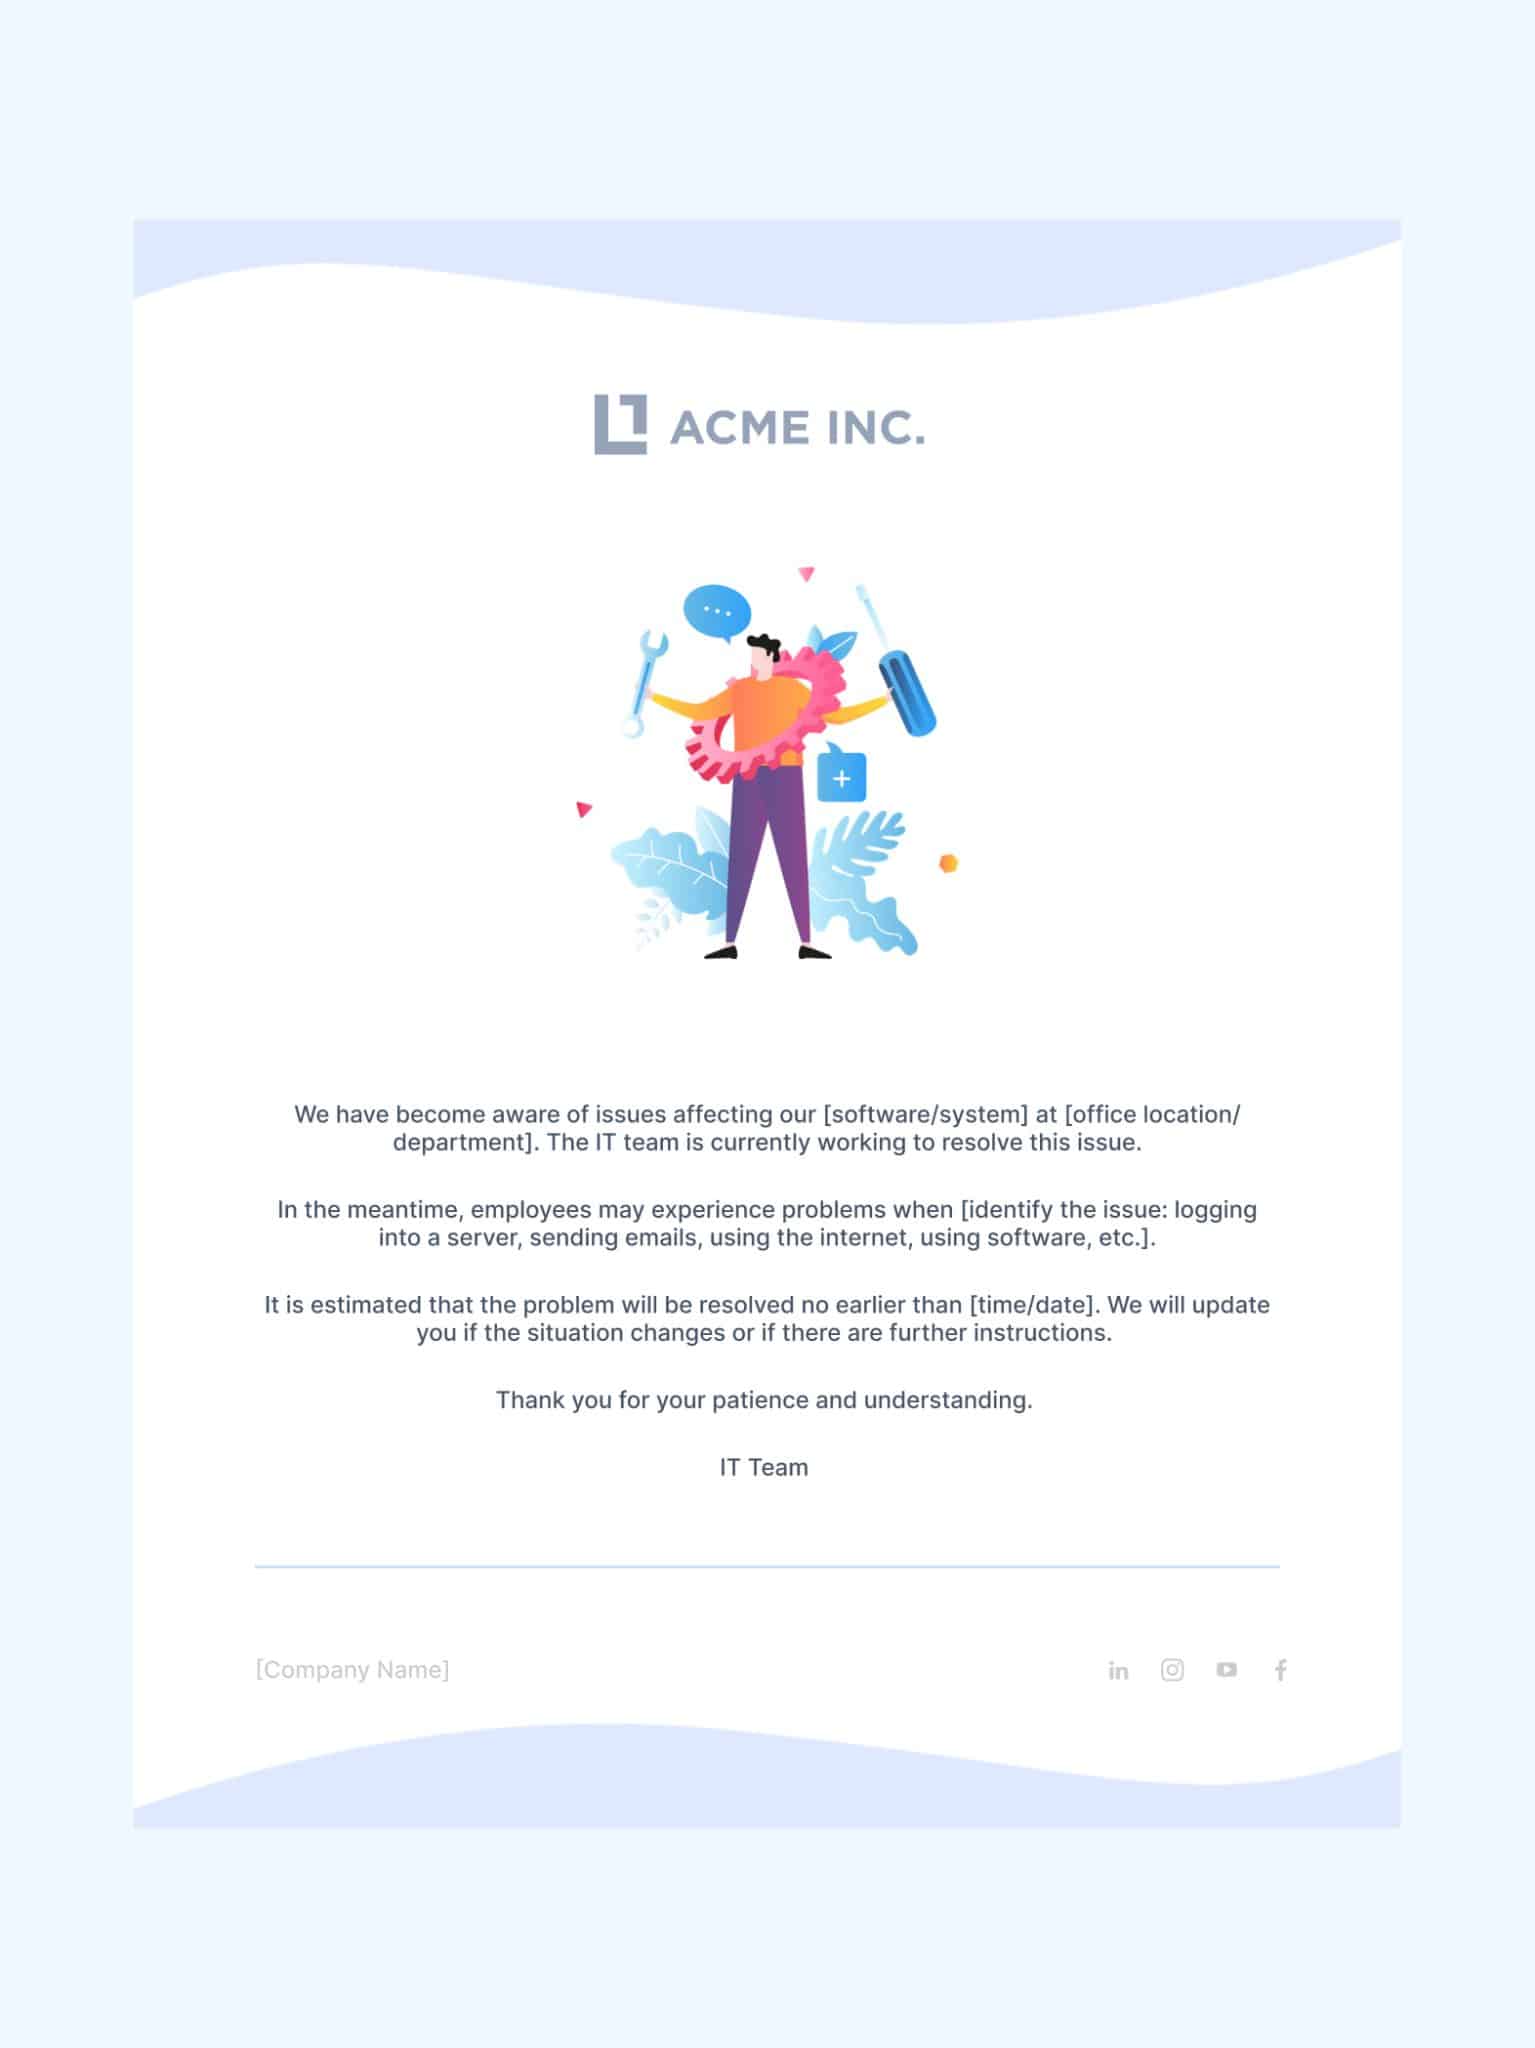 Sample email design for an IT Team update